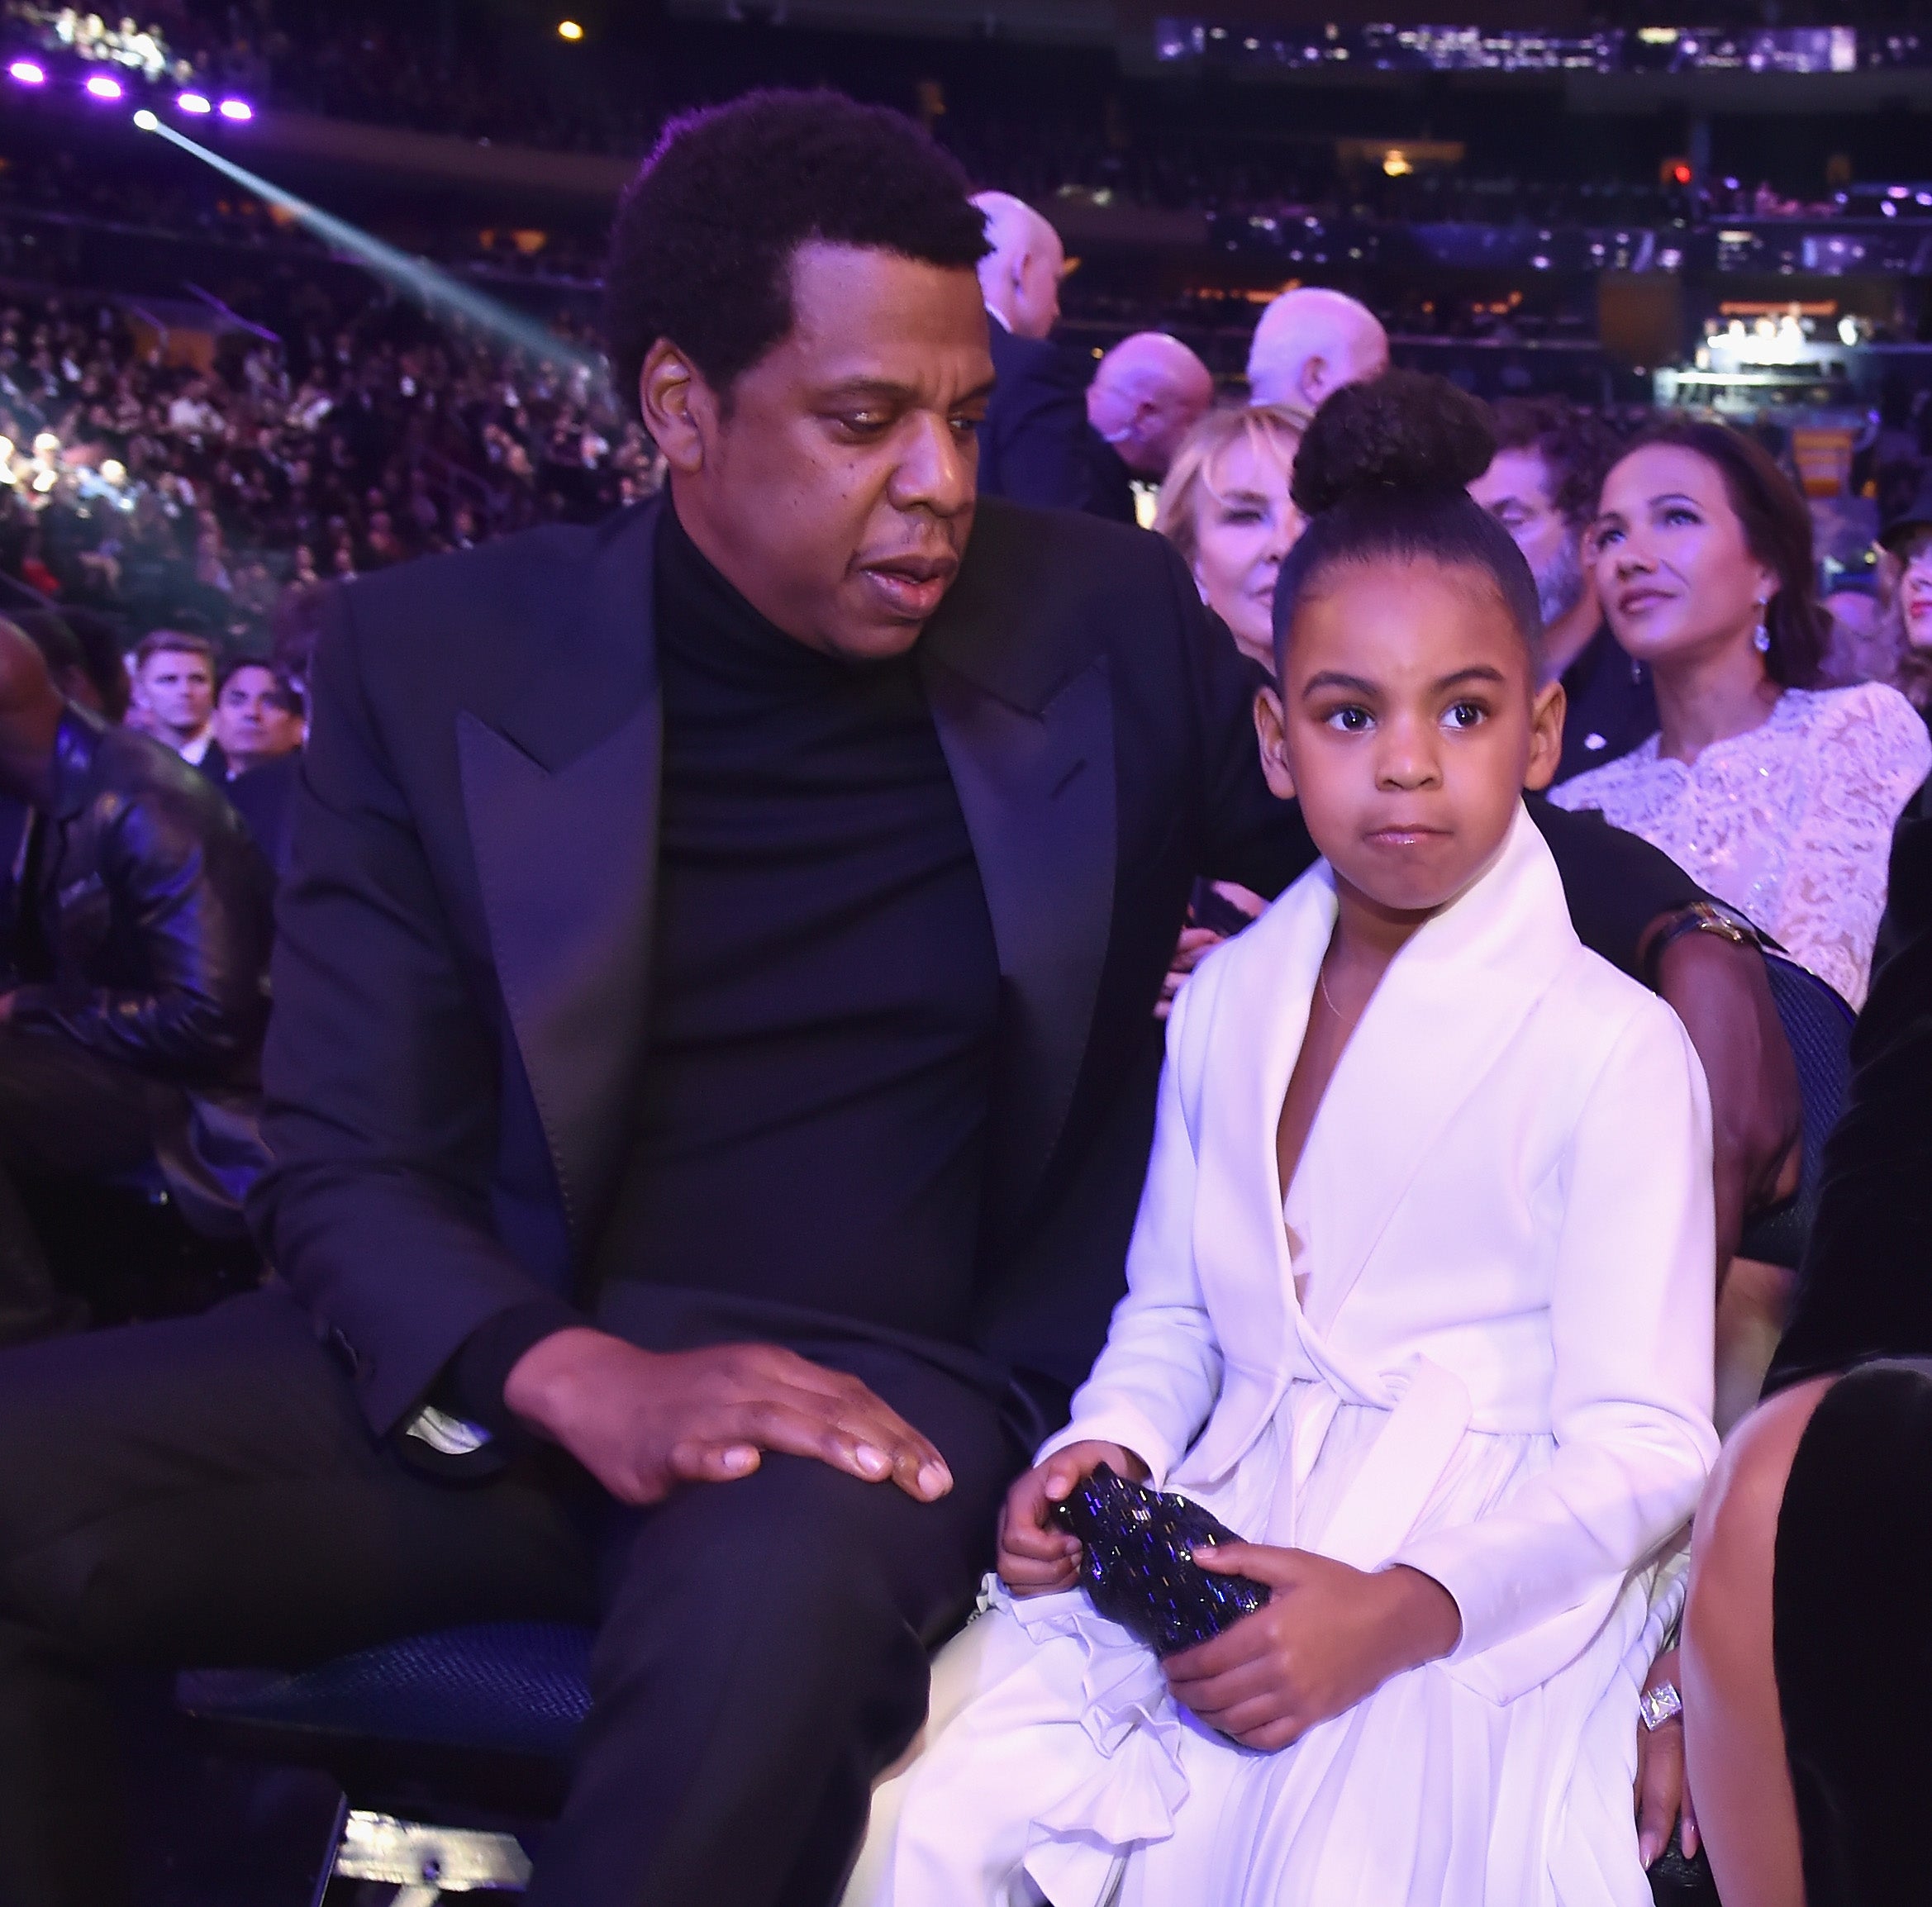 Princess Carter: This Video Of Blue Ivy Throwing Up The Roc Sign During Jay Z’s Performance Is The Cutest Ever
